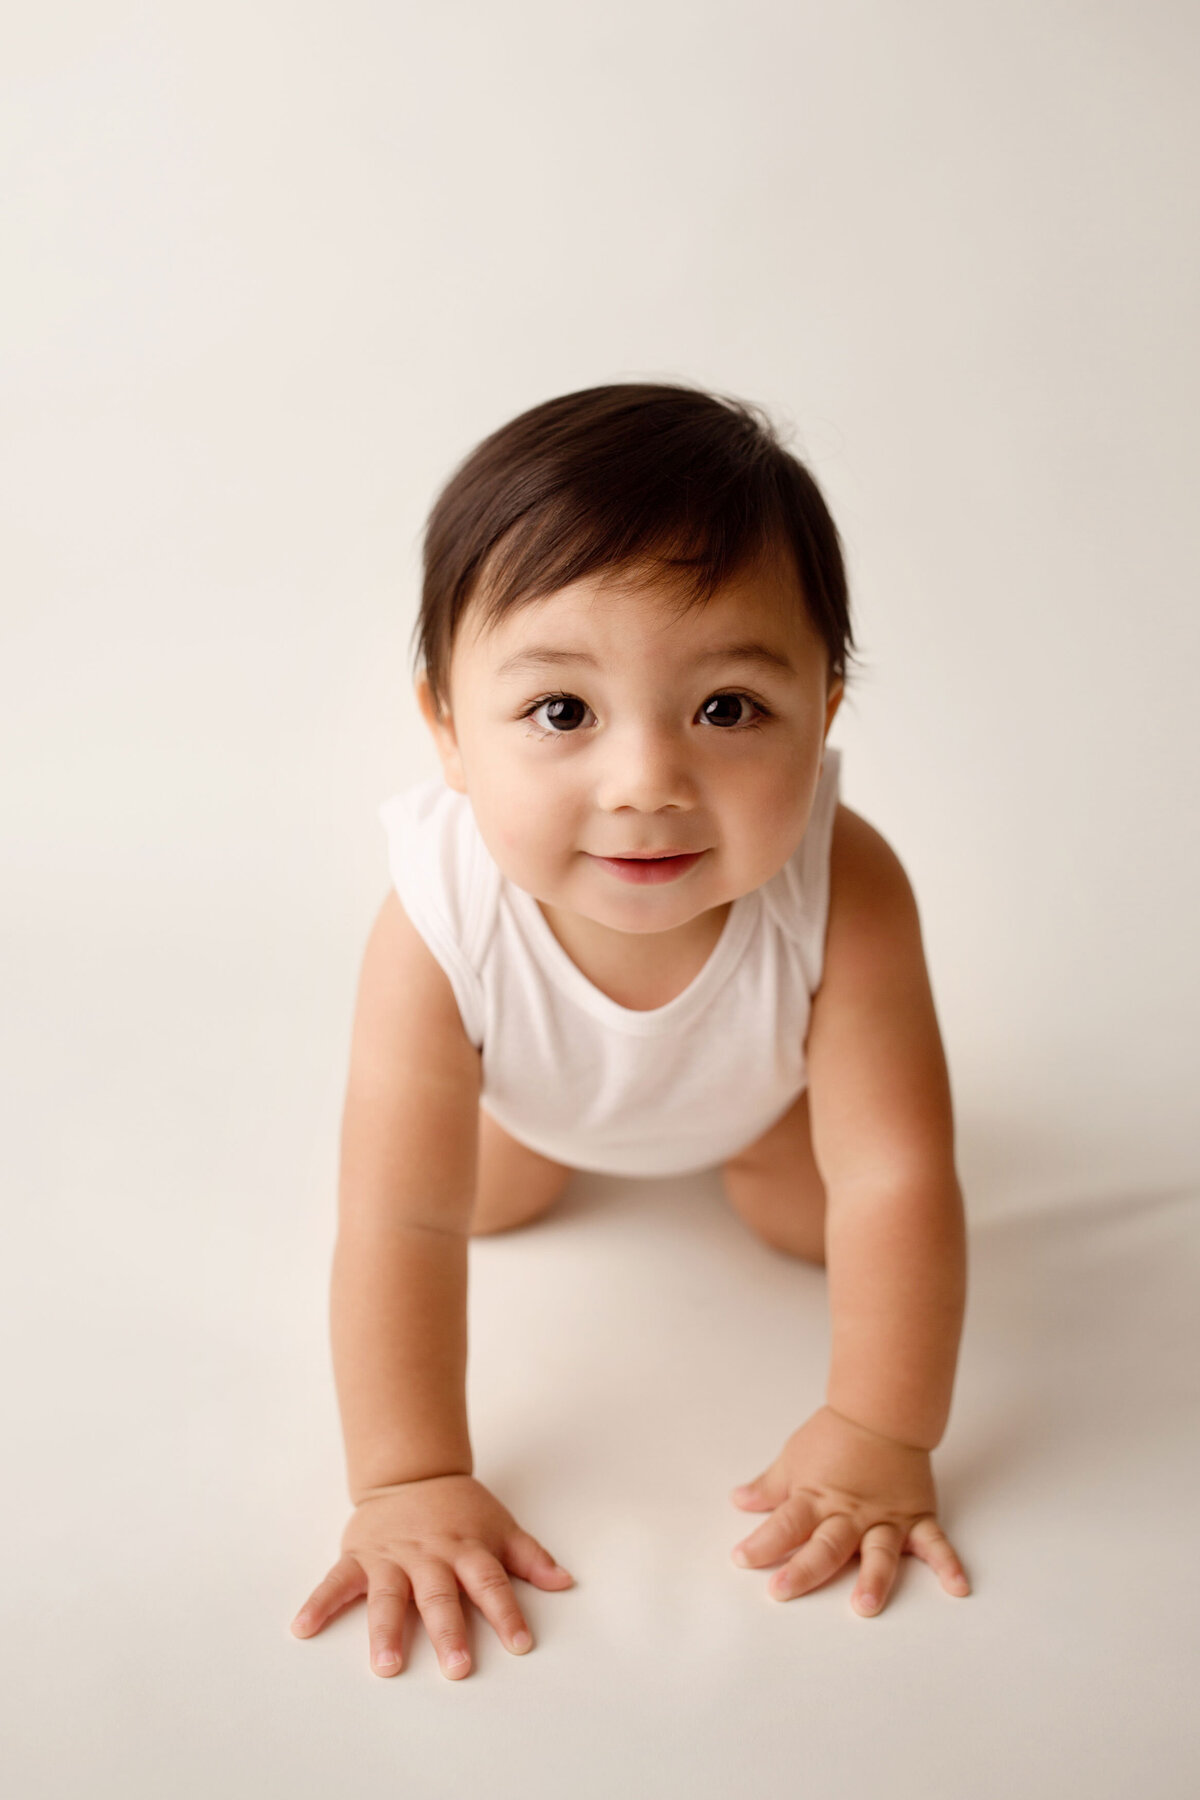 1 year old boy crawling on a white backdrop